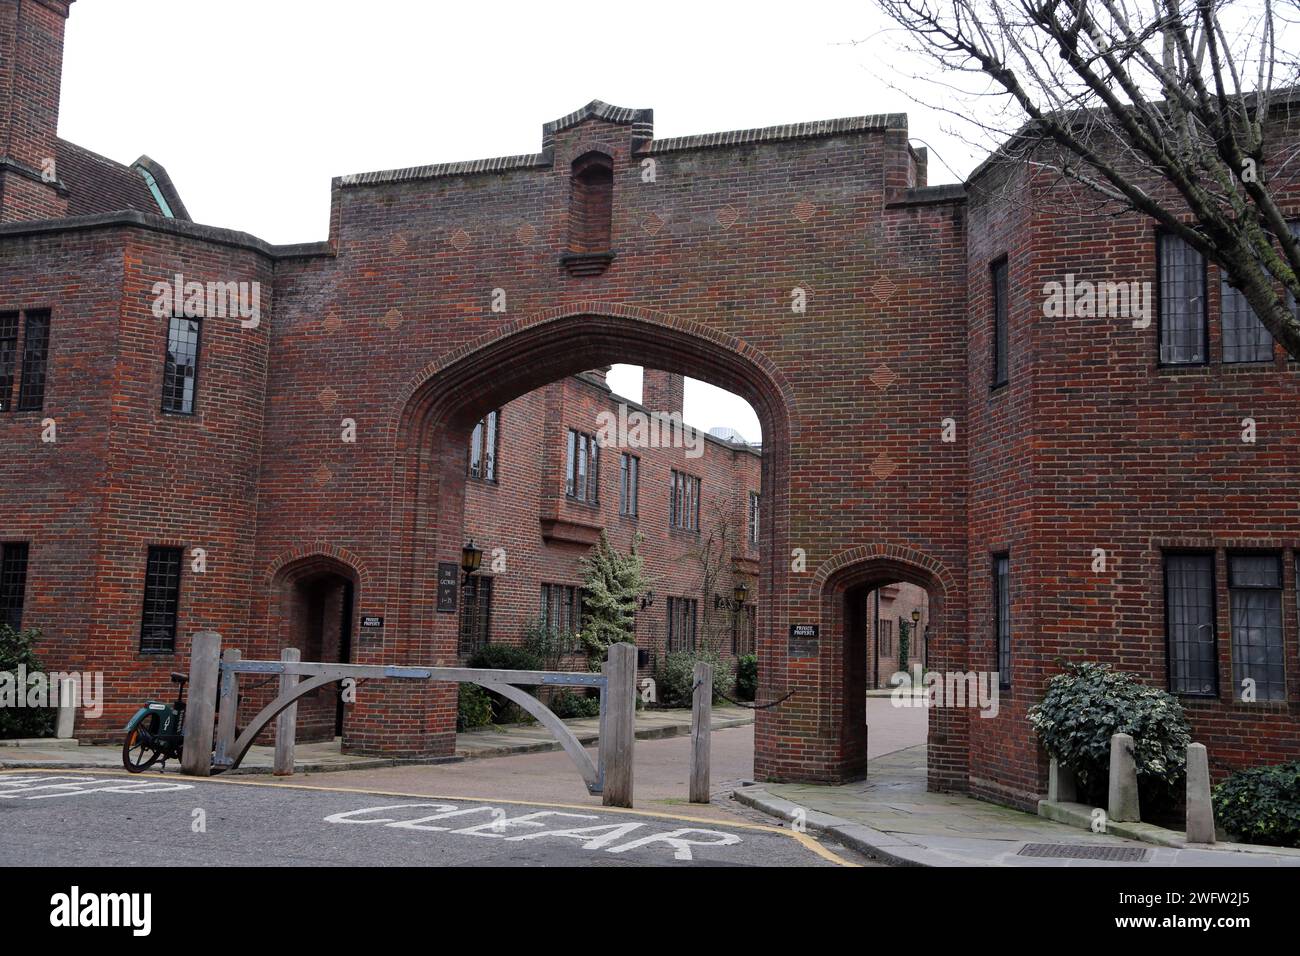 The Gateways 1930's grade II Listed Building Sprimont place Chelsea London England Stock Photo